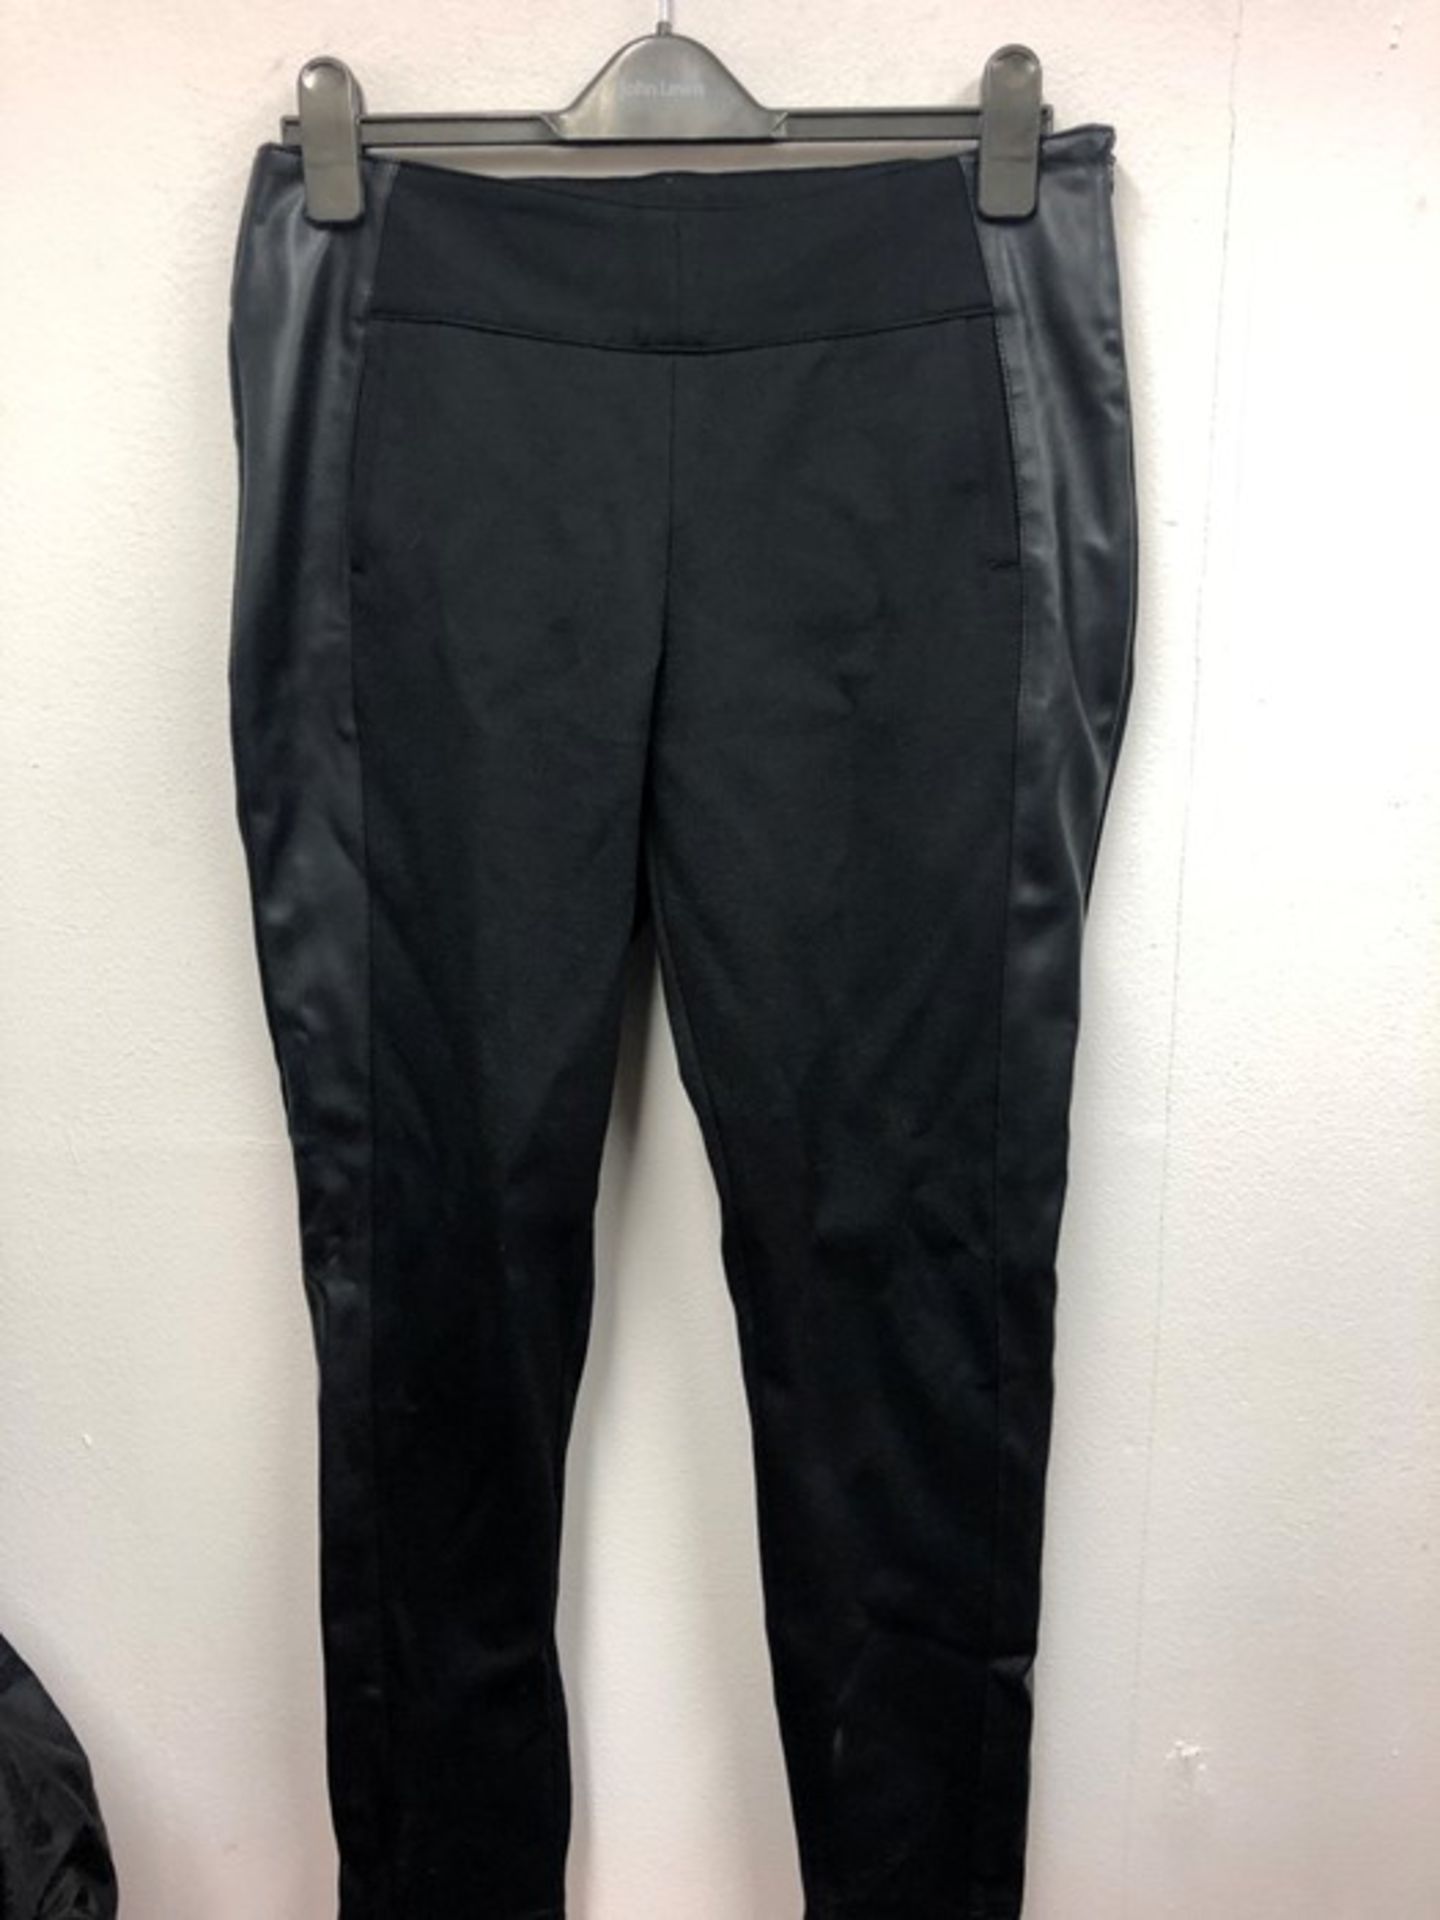 1 AS NEW PAIR OF BLACK LA REDOUTE PANTS (VIEWING HIGHLY RECOMMENDED)